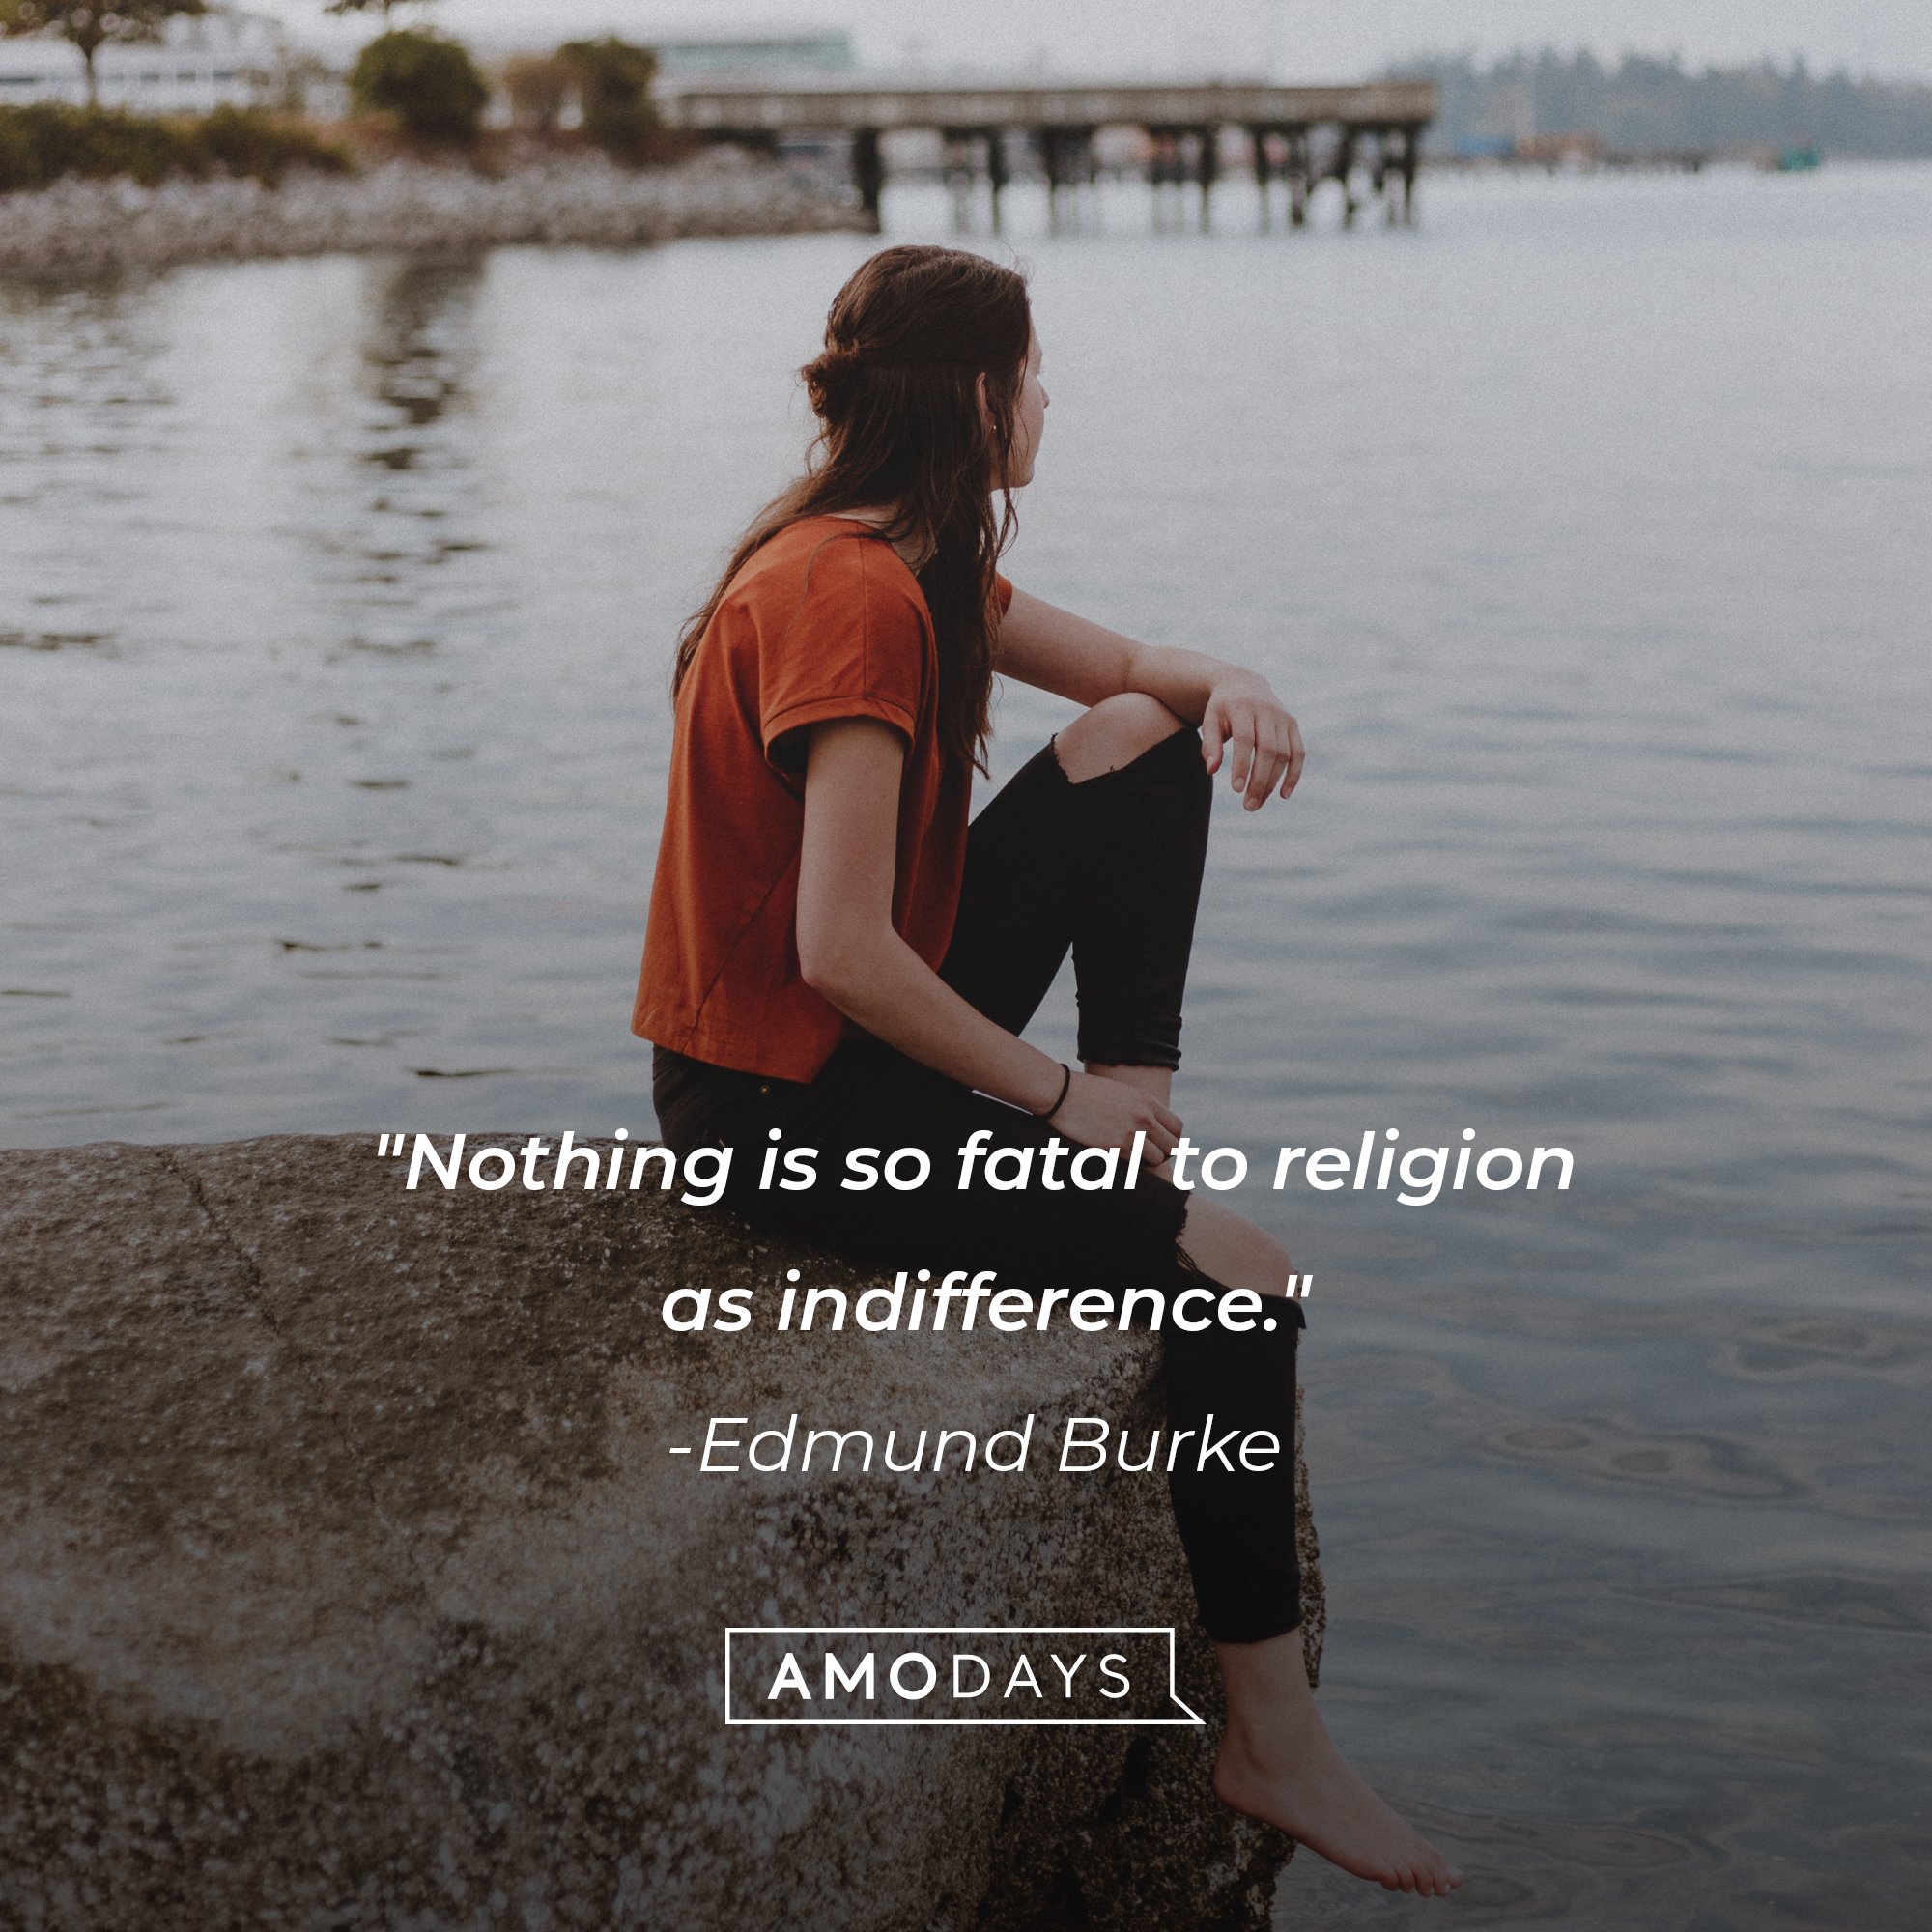 Edmund Burke's quote: "Nothing is so fatal to religion as indifference." | Image: AmoDays